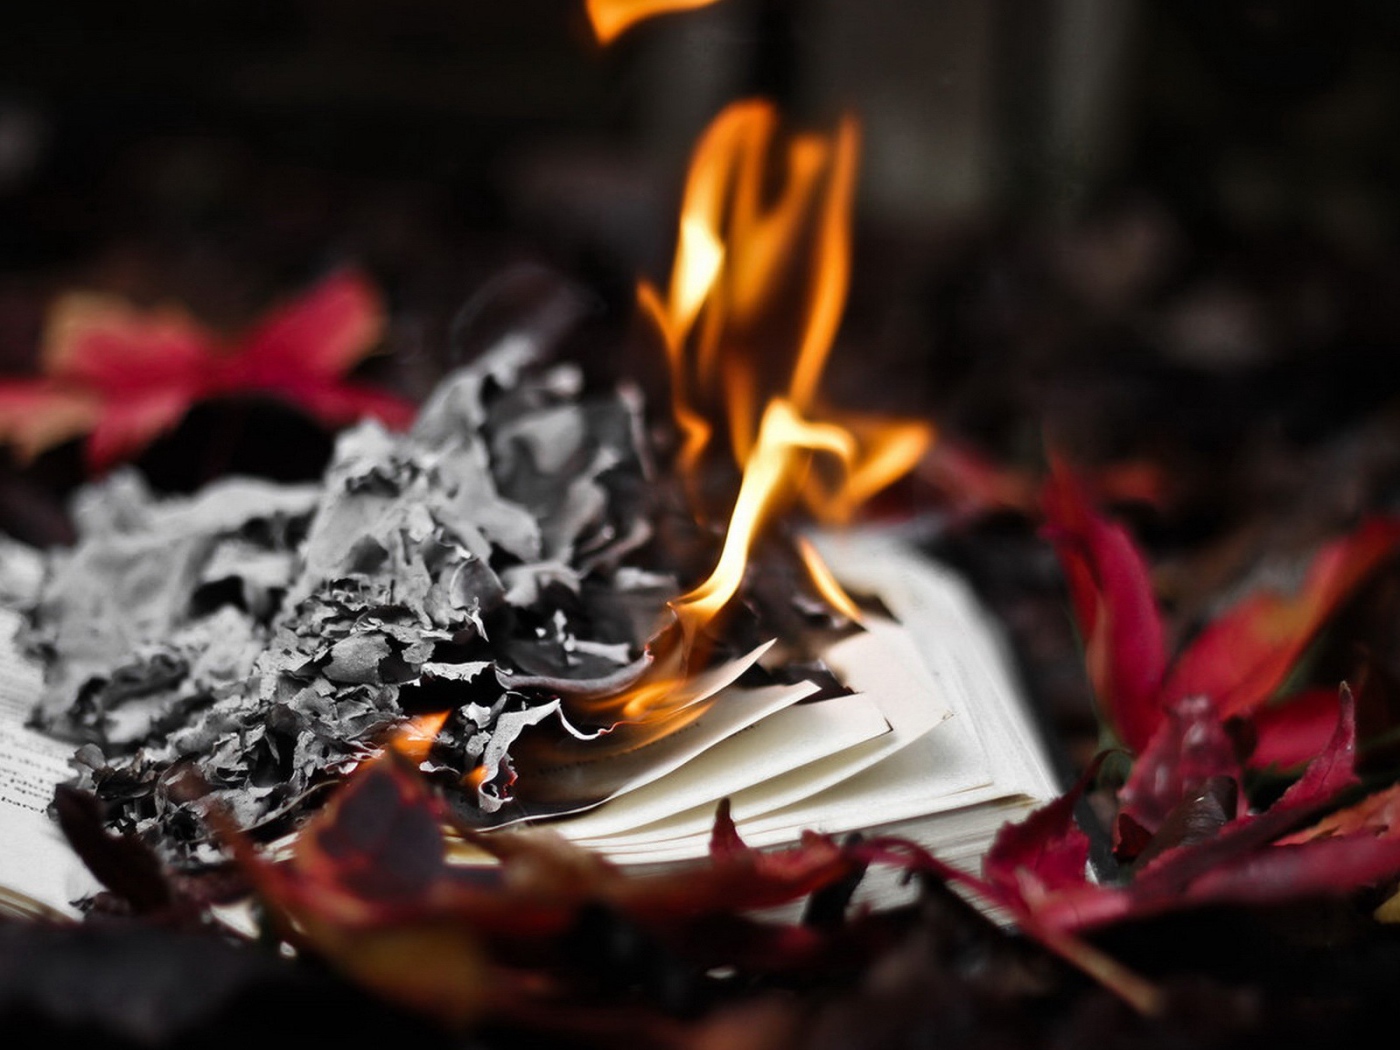 Burn the book in the autumn leaves